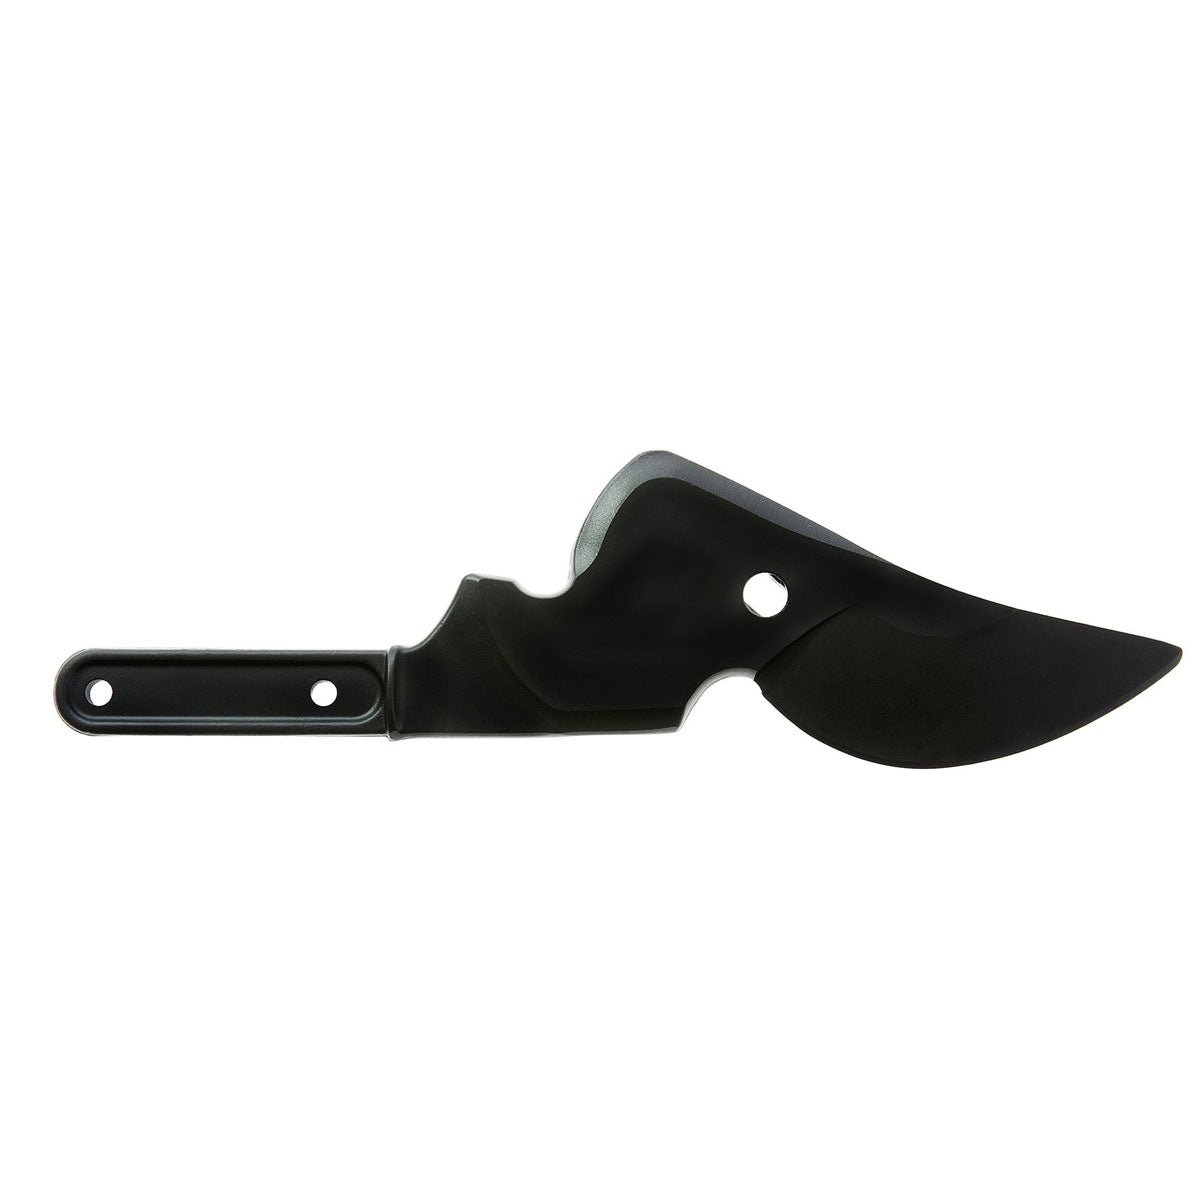 Berger 94008 Blade for 4260, 4280